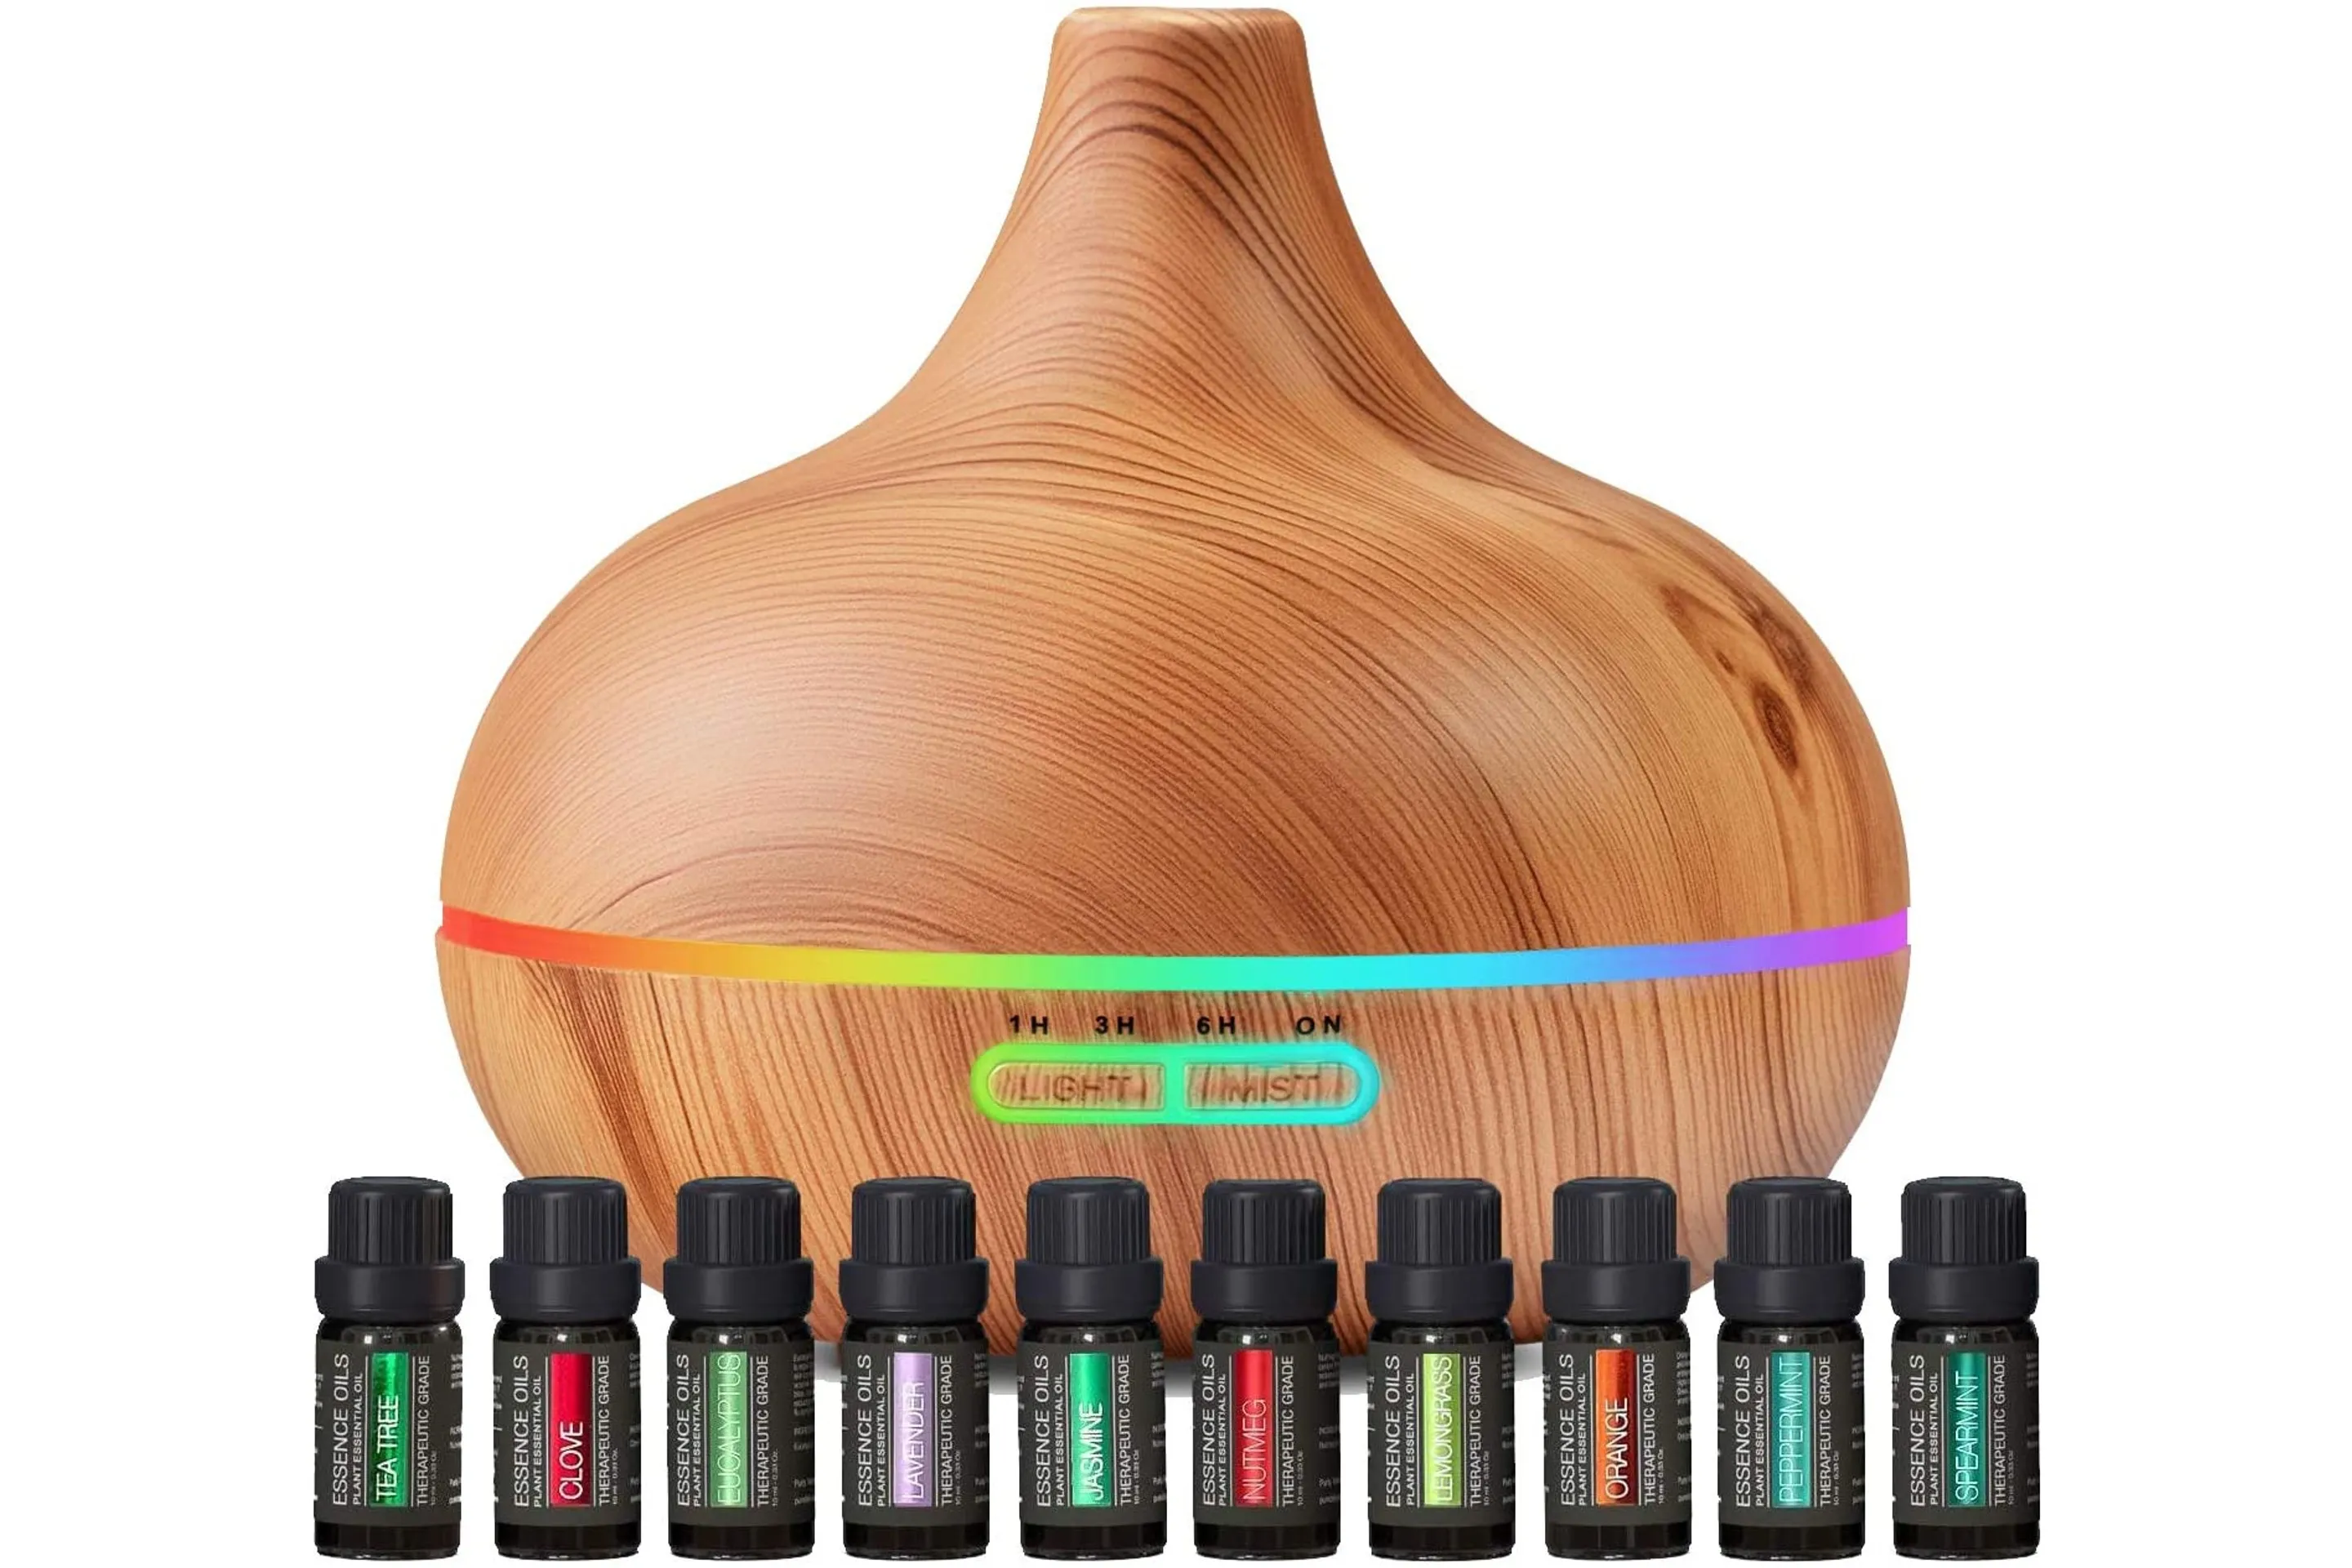 Doterra Essential Oils in Natural Setting Editorial Stock Photo - Image of  essence, bottles: 201061608